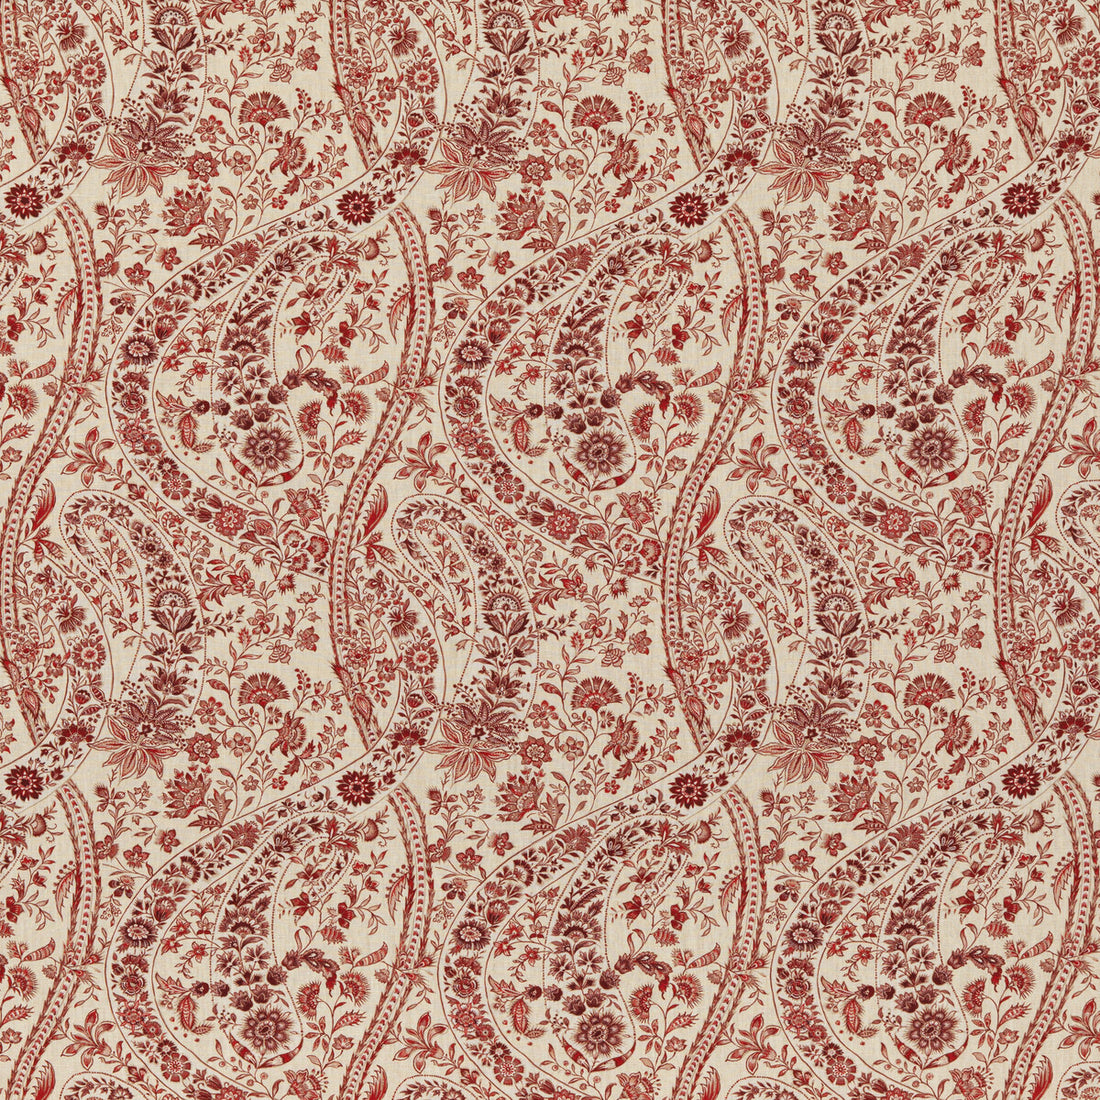 Bukhara Paisley fabric in red color - pattern BP10835.2.0 - by G P &amp; J Baker in the Coromandel collection